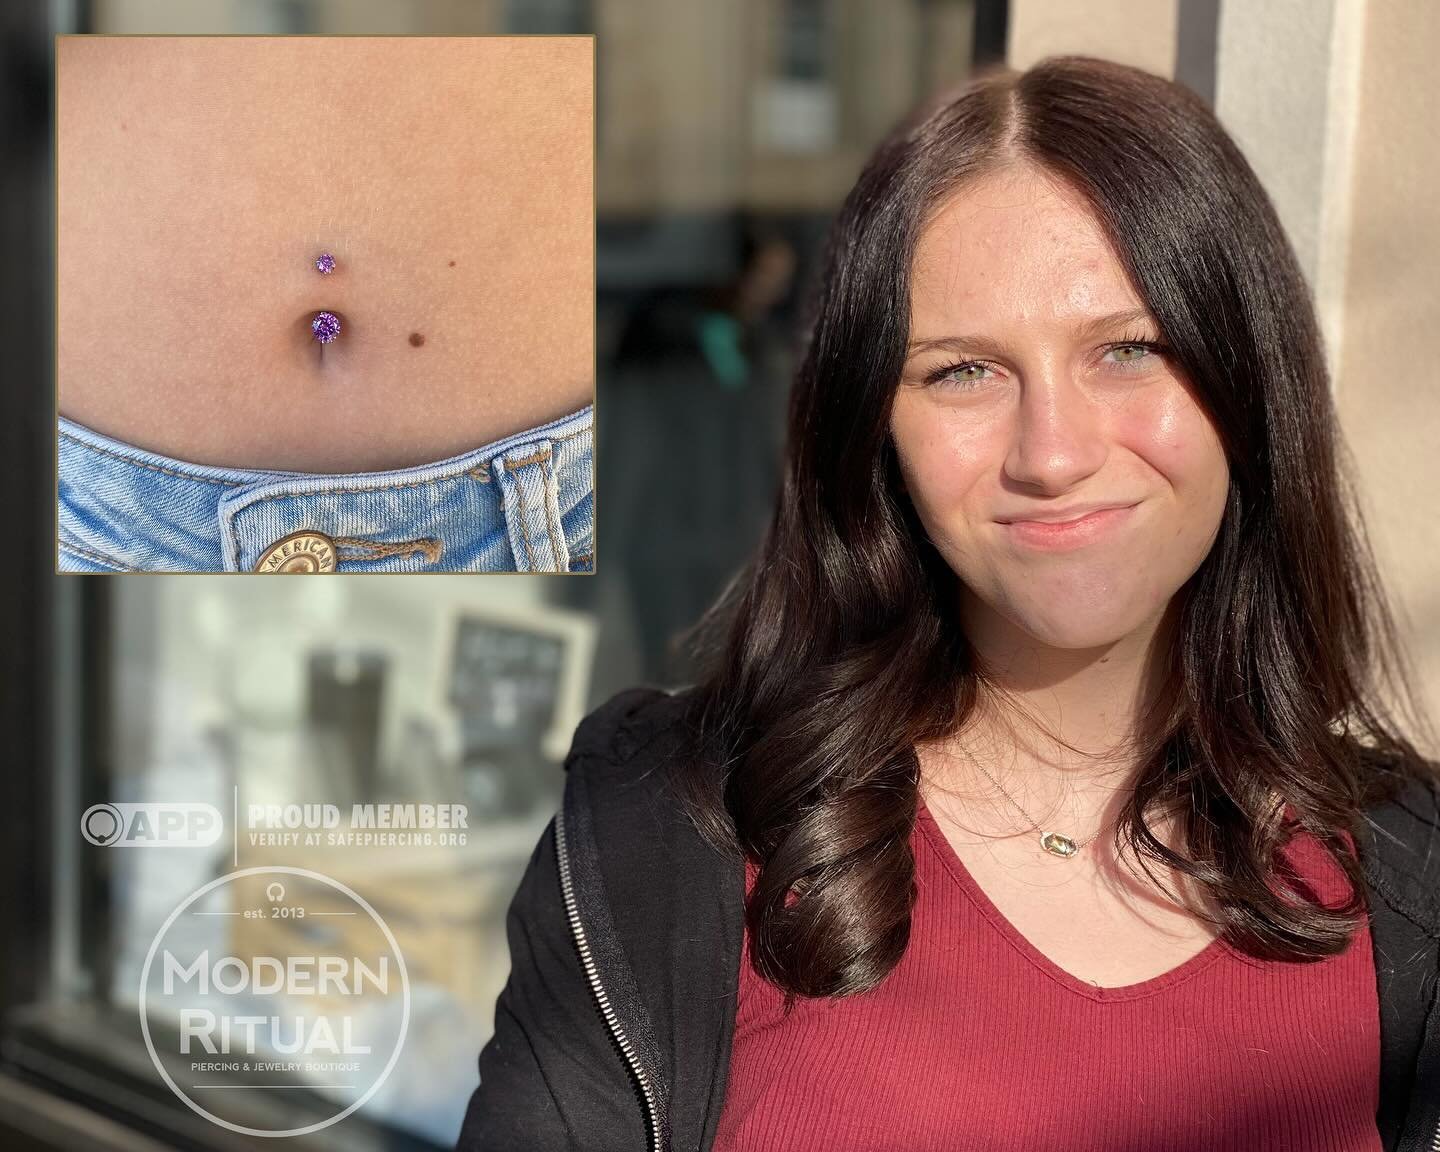 Healed navel piercing by Rob with an Amethyst Gemmed Curve from @intrinsicbody ! Rob, Lea and Dave are in the shop till 7pm tonight. We hope to see you soon!

#navel #navelpiercing #naveljewelry #titanium #titaniumjewelry #amethyst #appmember #safepi